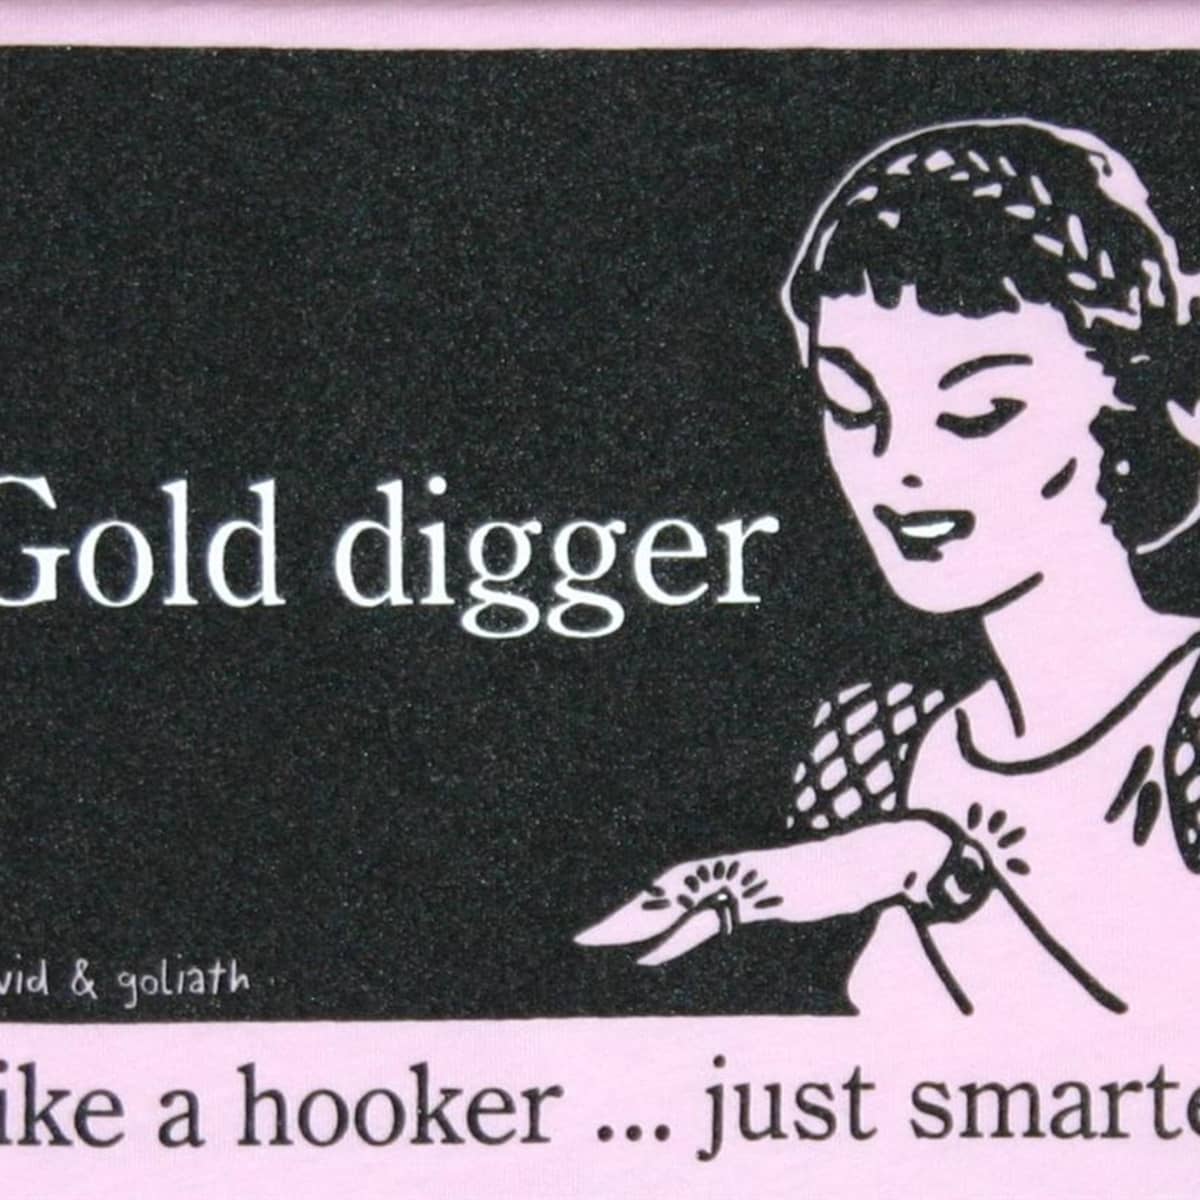 He's a gold digger and she's fine with it